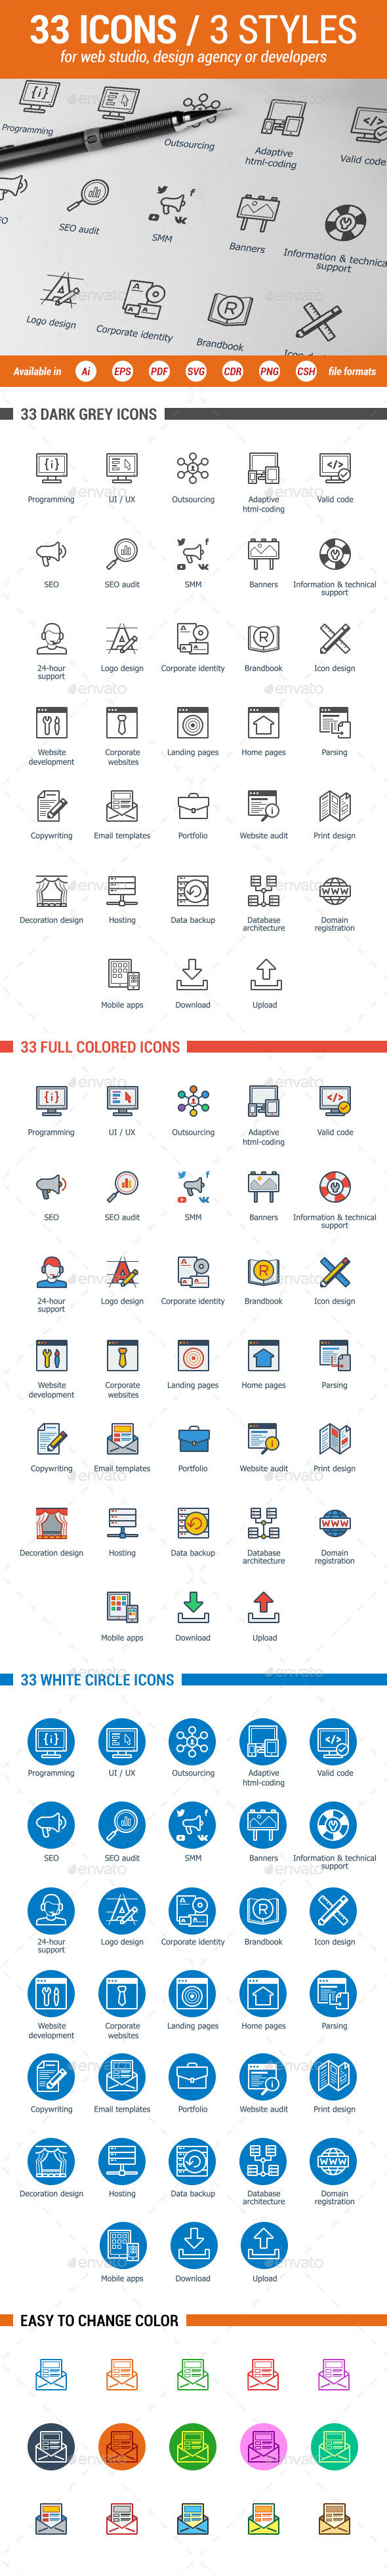 Preview 33 icons